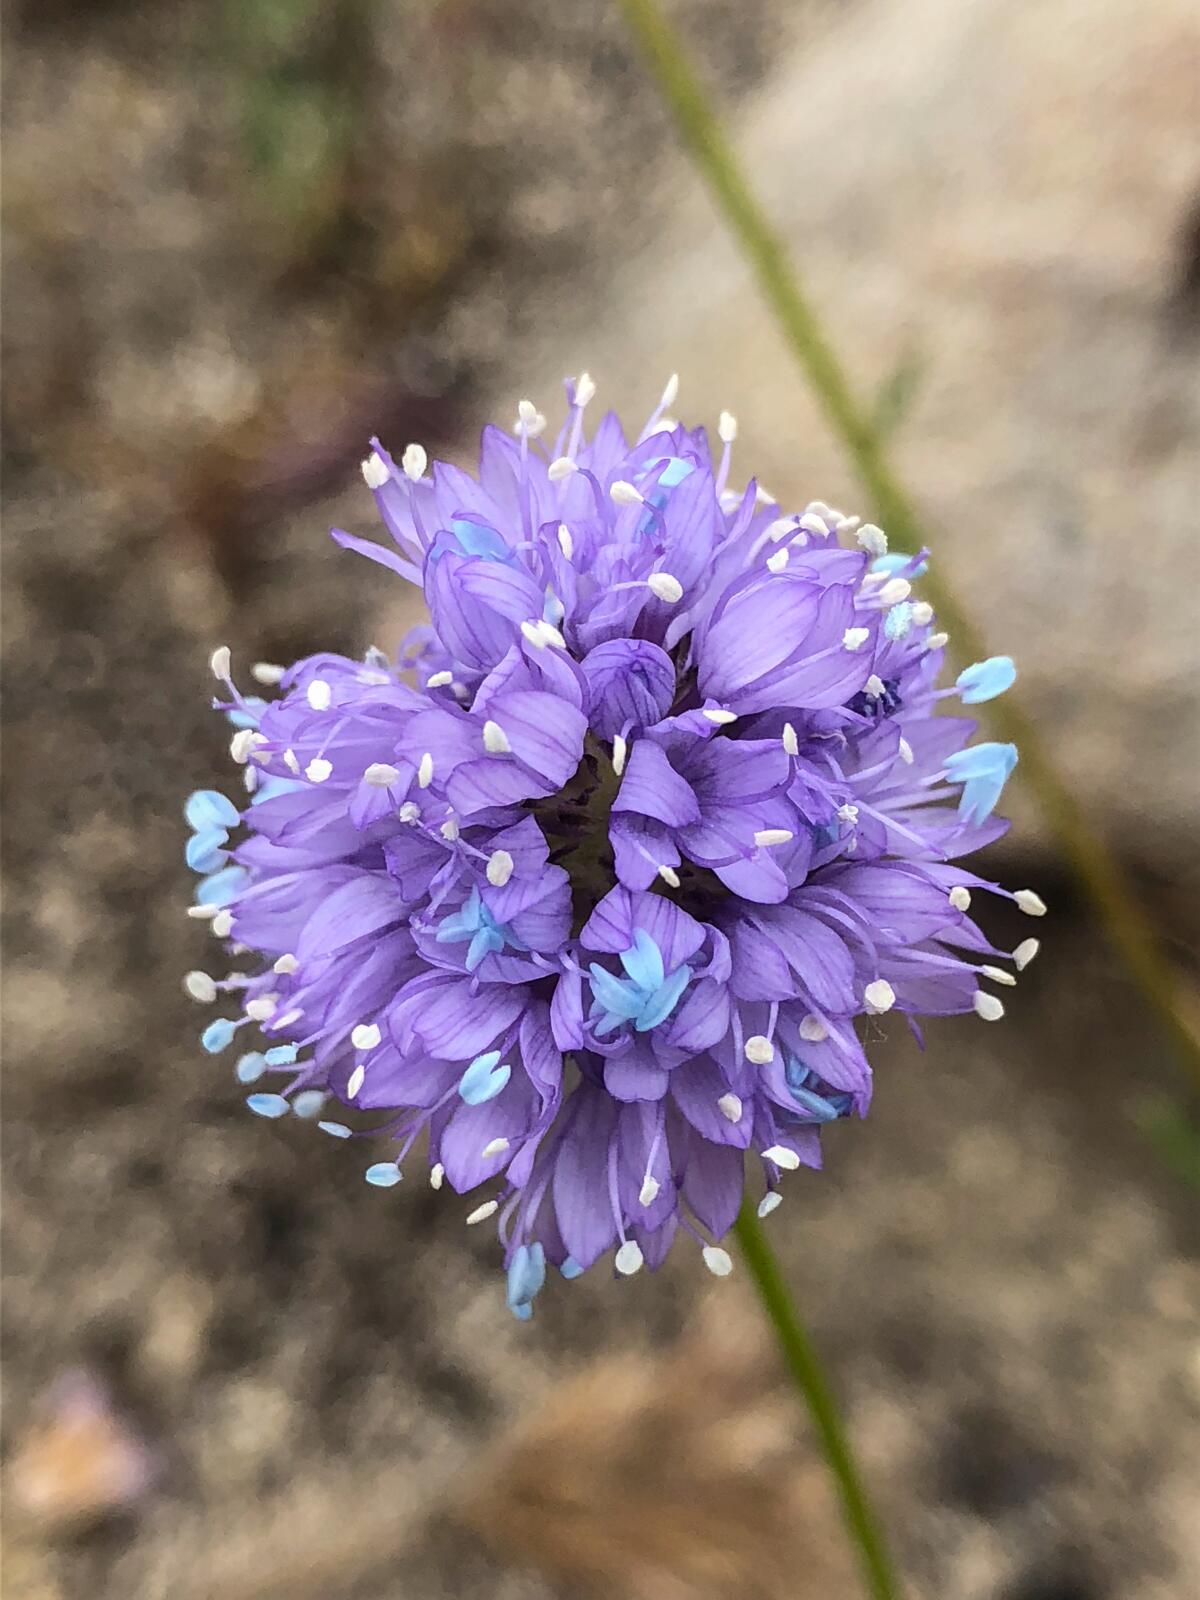 The gillia wildflower, a lavender-color flower 